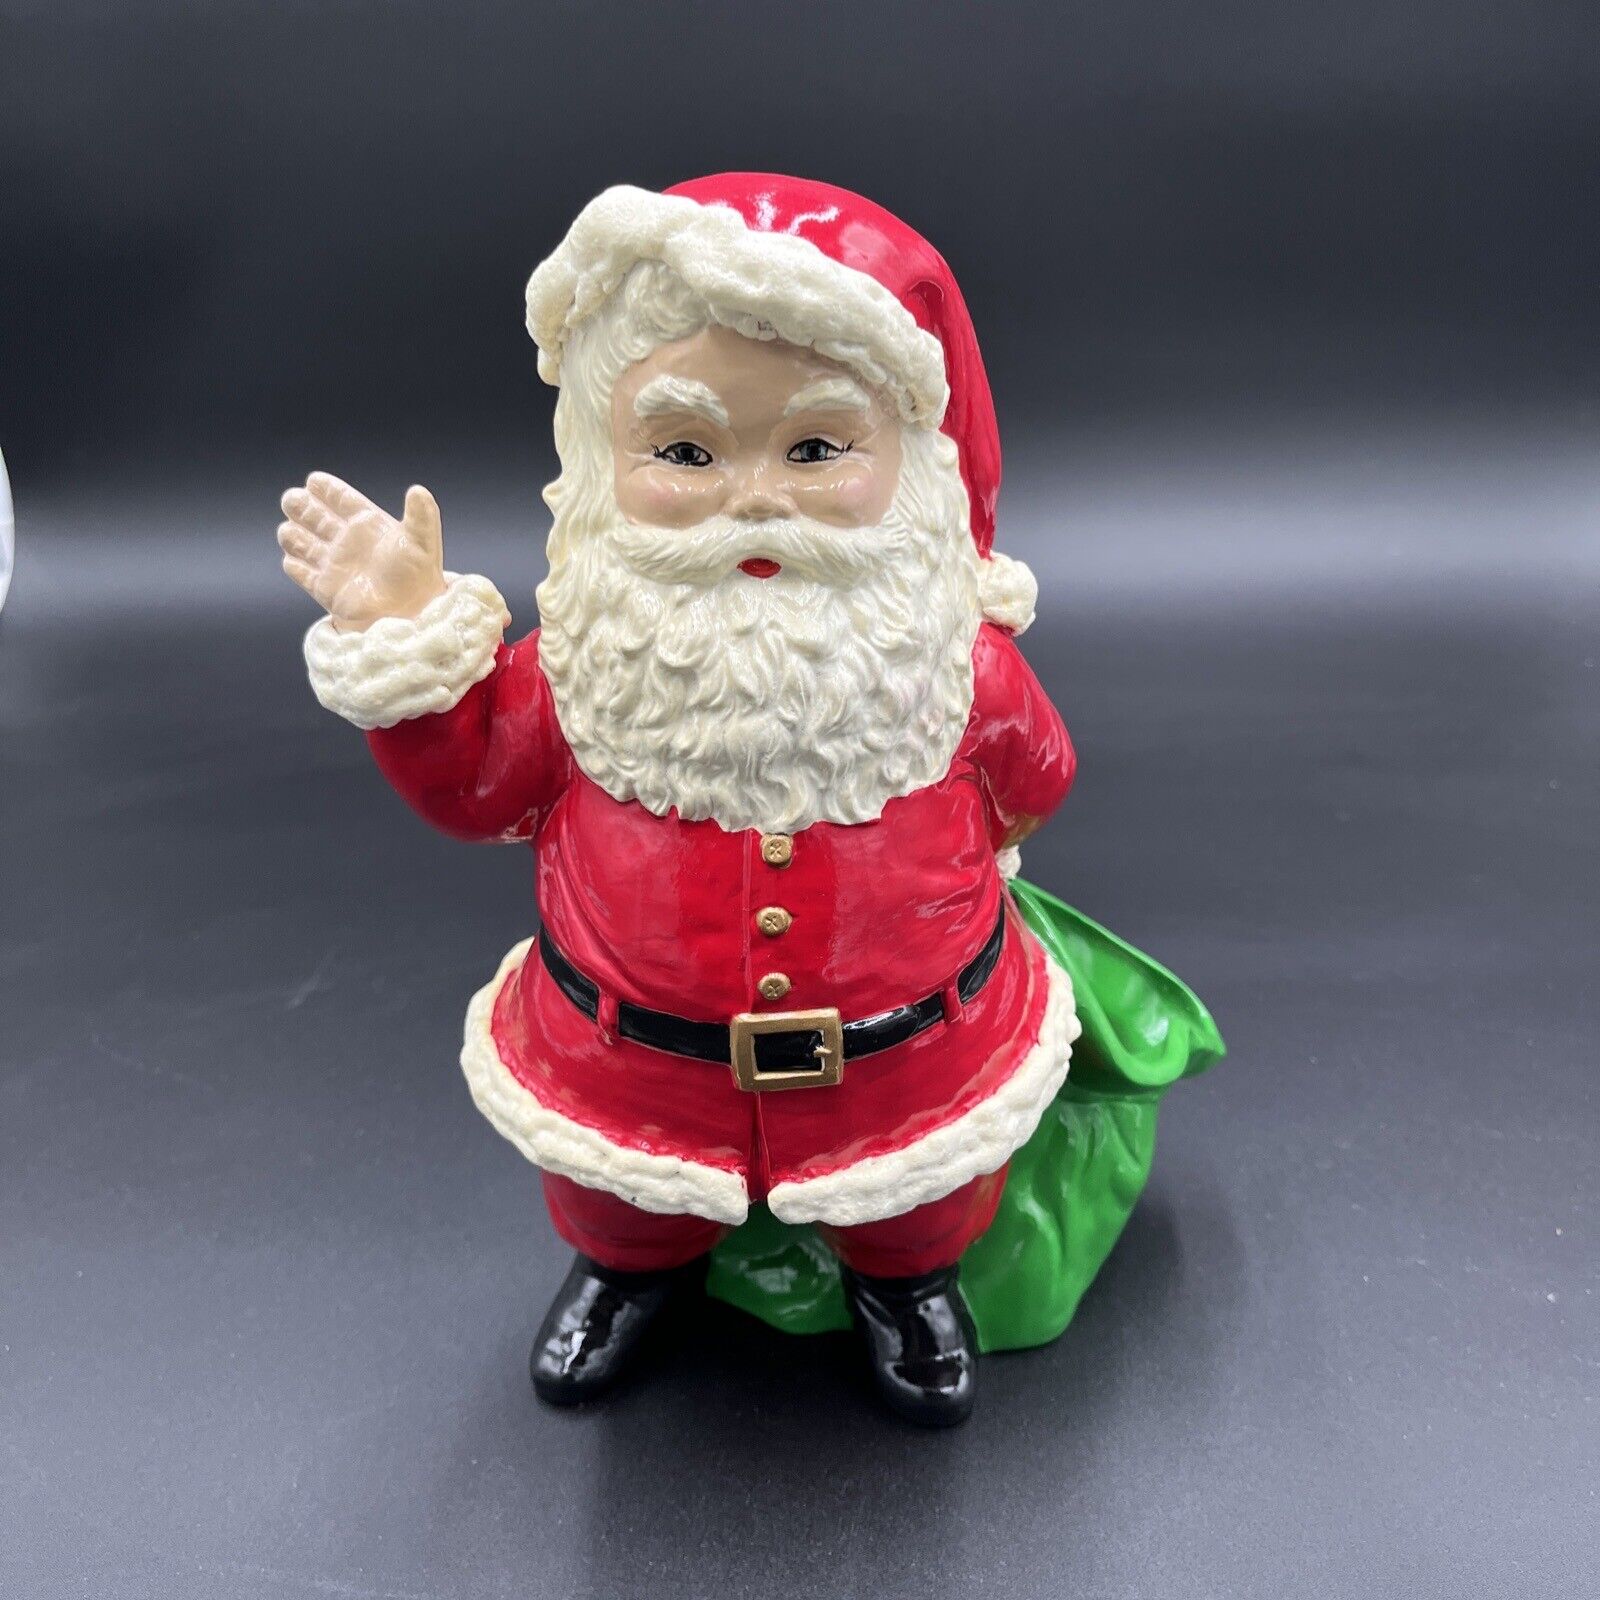 1973 Hand Painted 10.5” 1973 Duncan Ceramic Santa Clause With Toy Sack